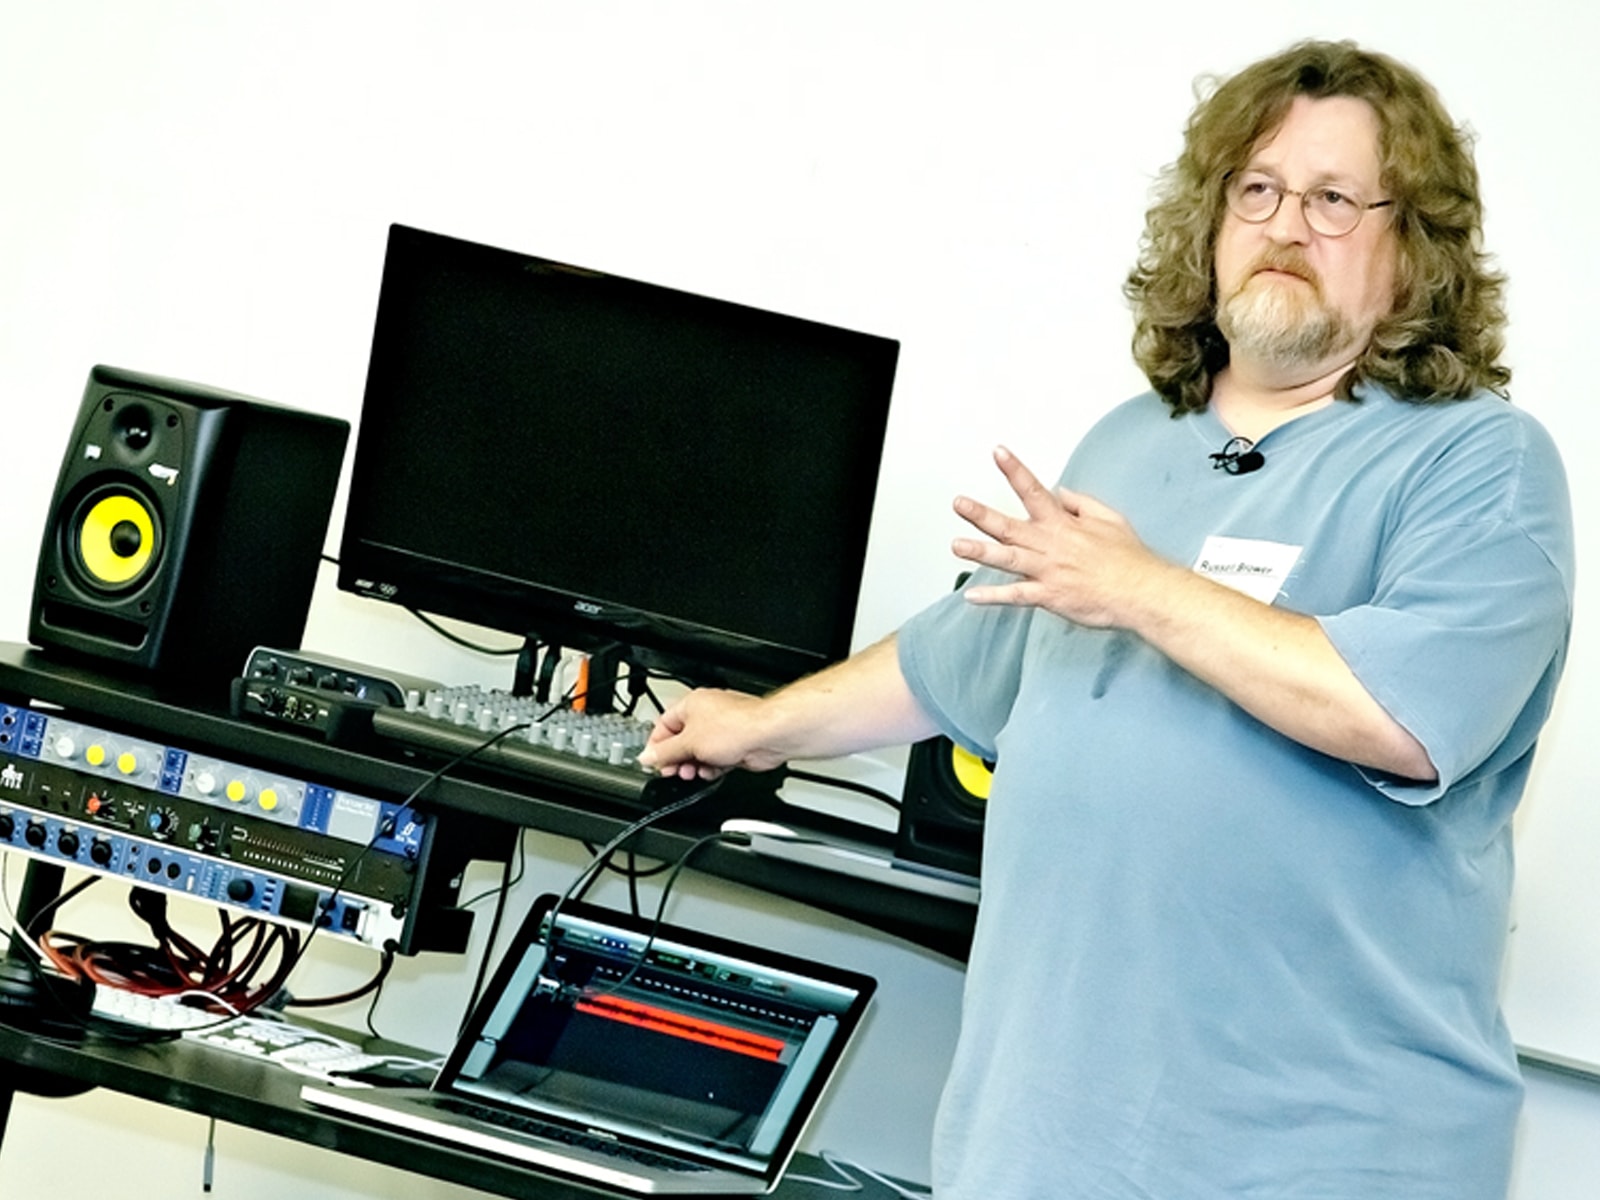 Russell Brower giving a sound demonstration in a DigiPen classroom